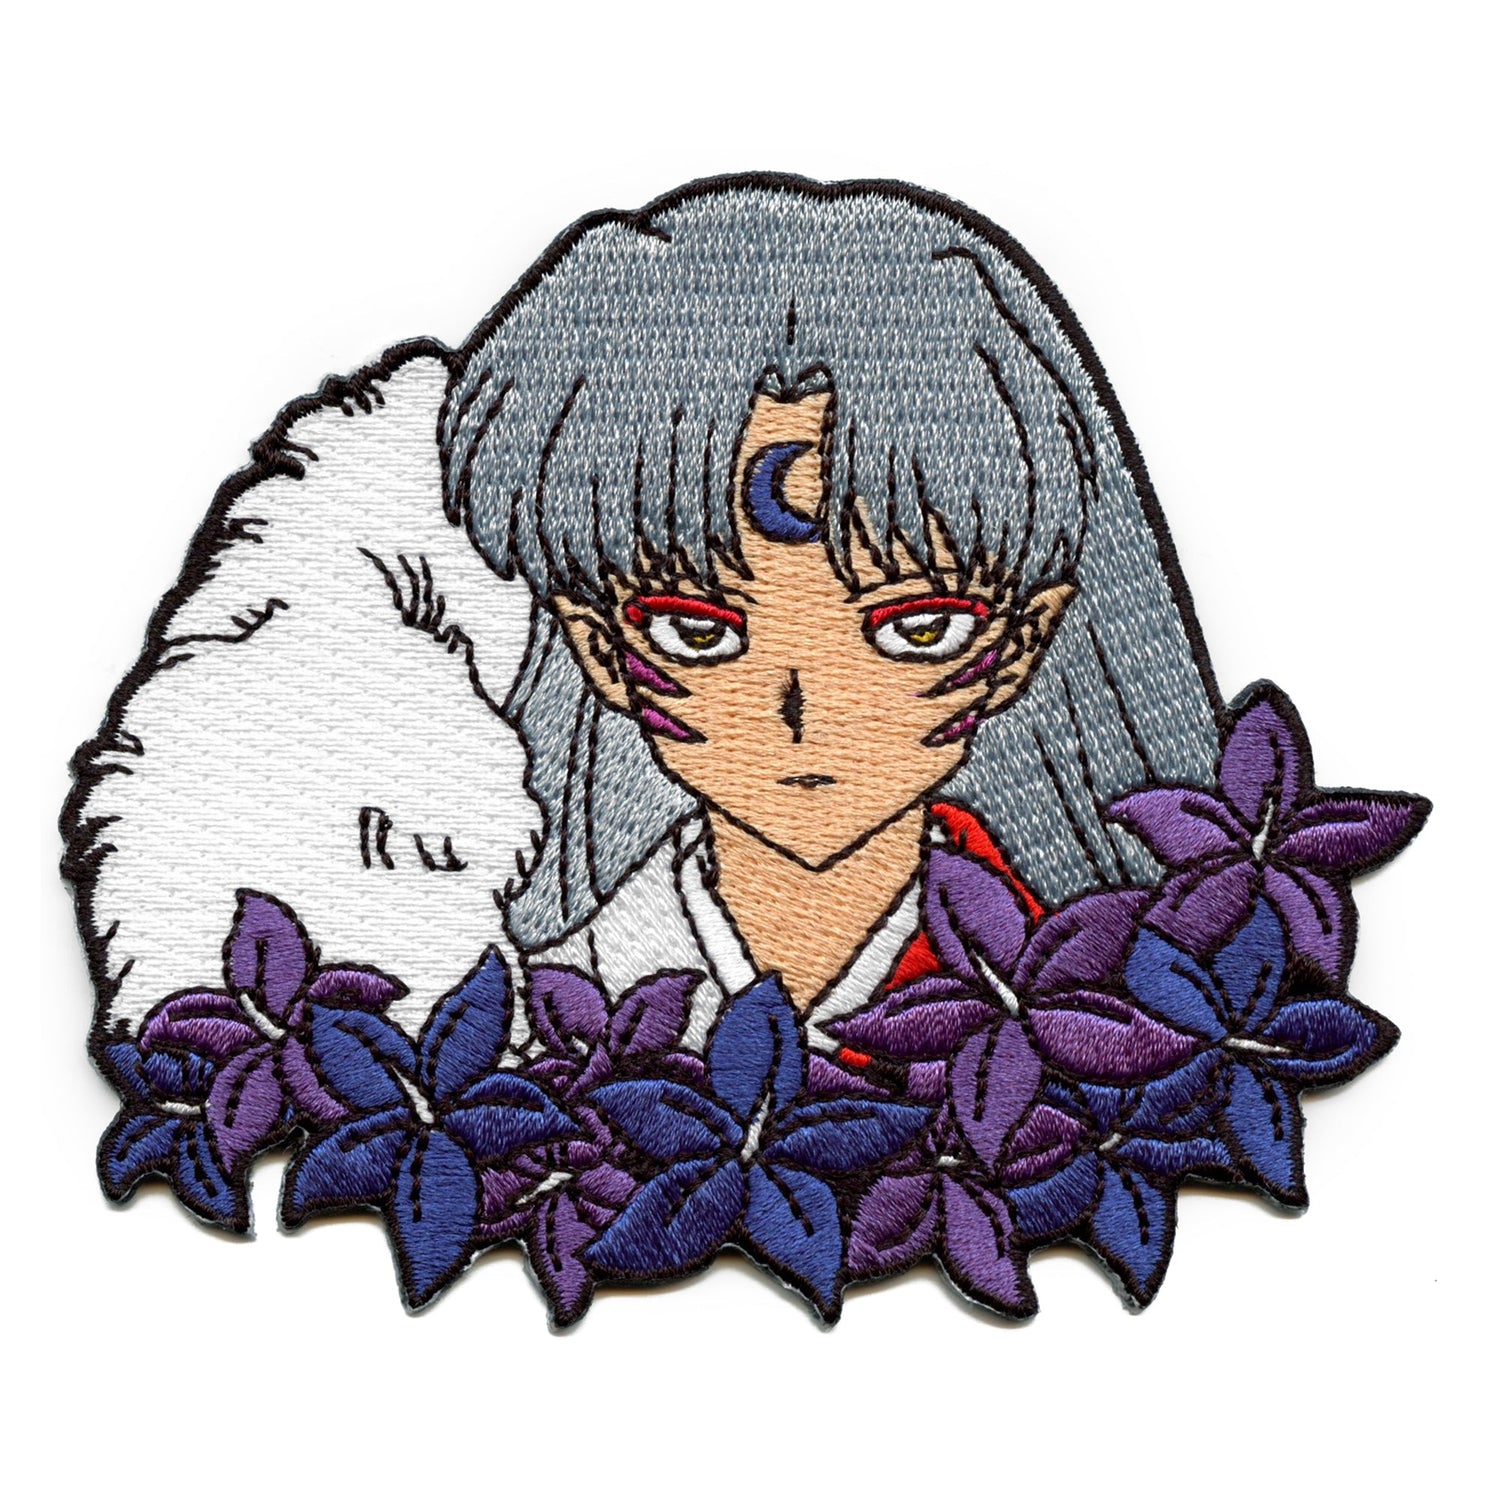 Inuyasha Patches